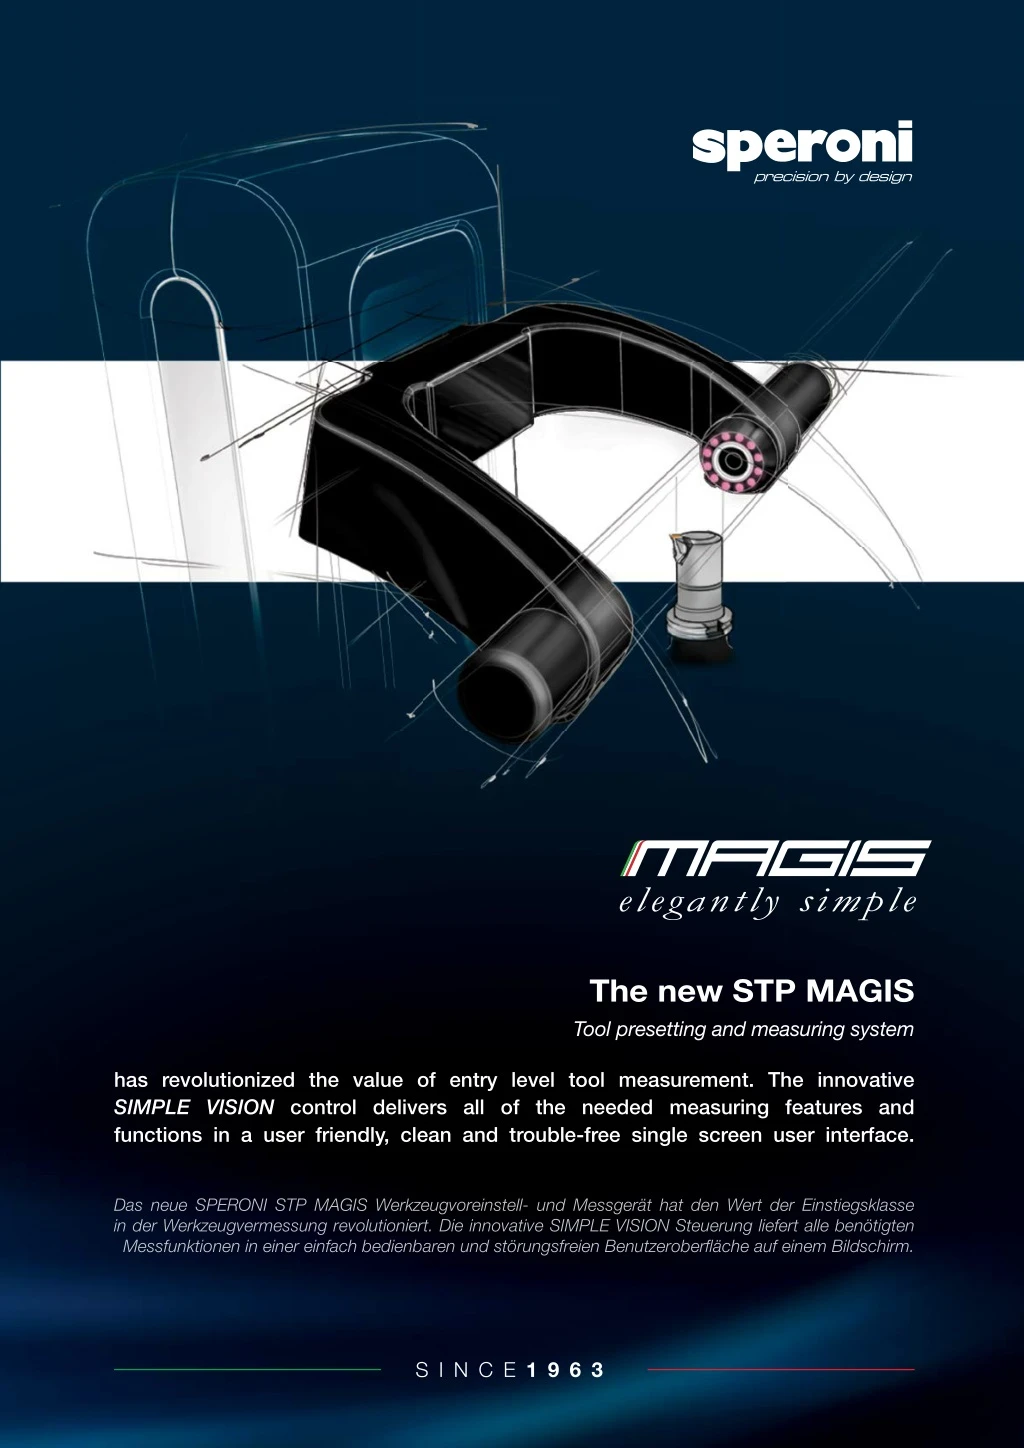 the new stp magis tool presetting and measuring